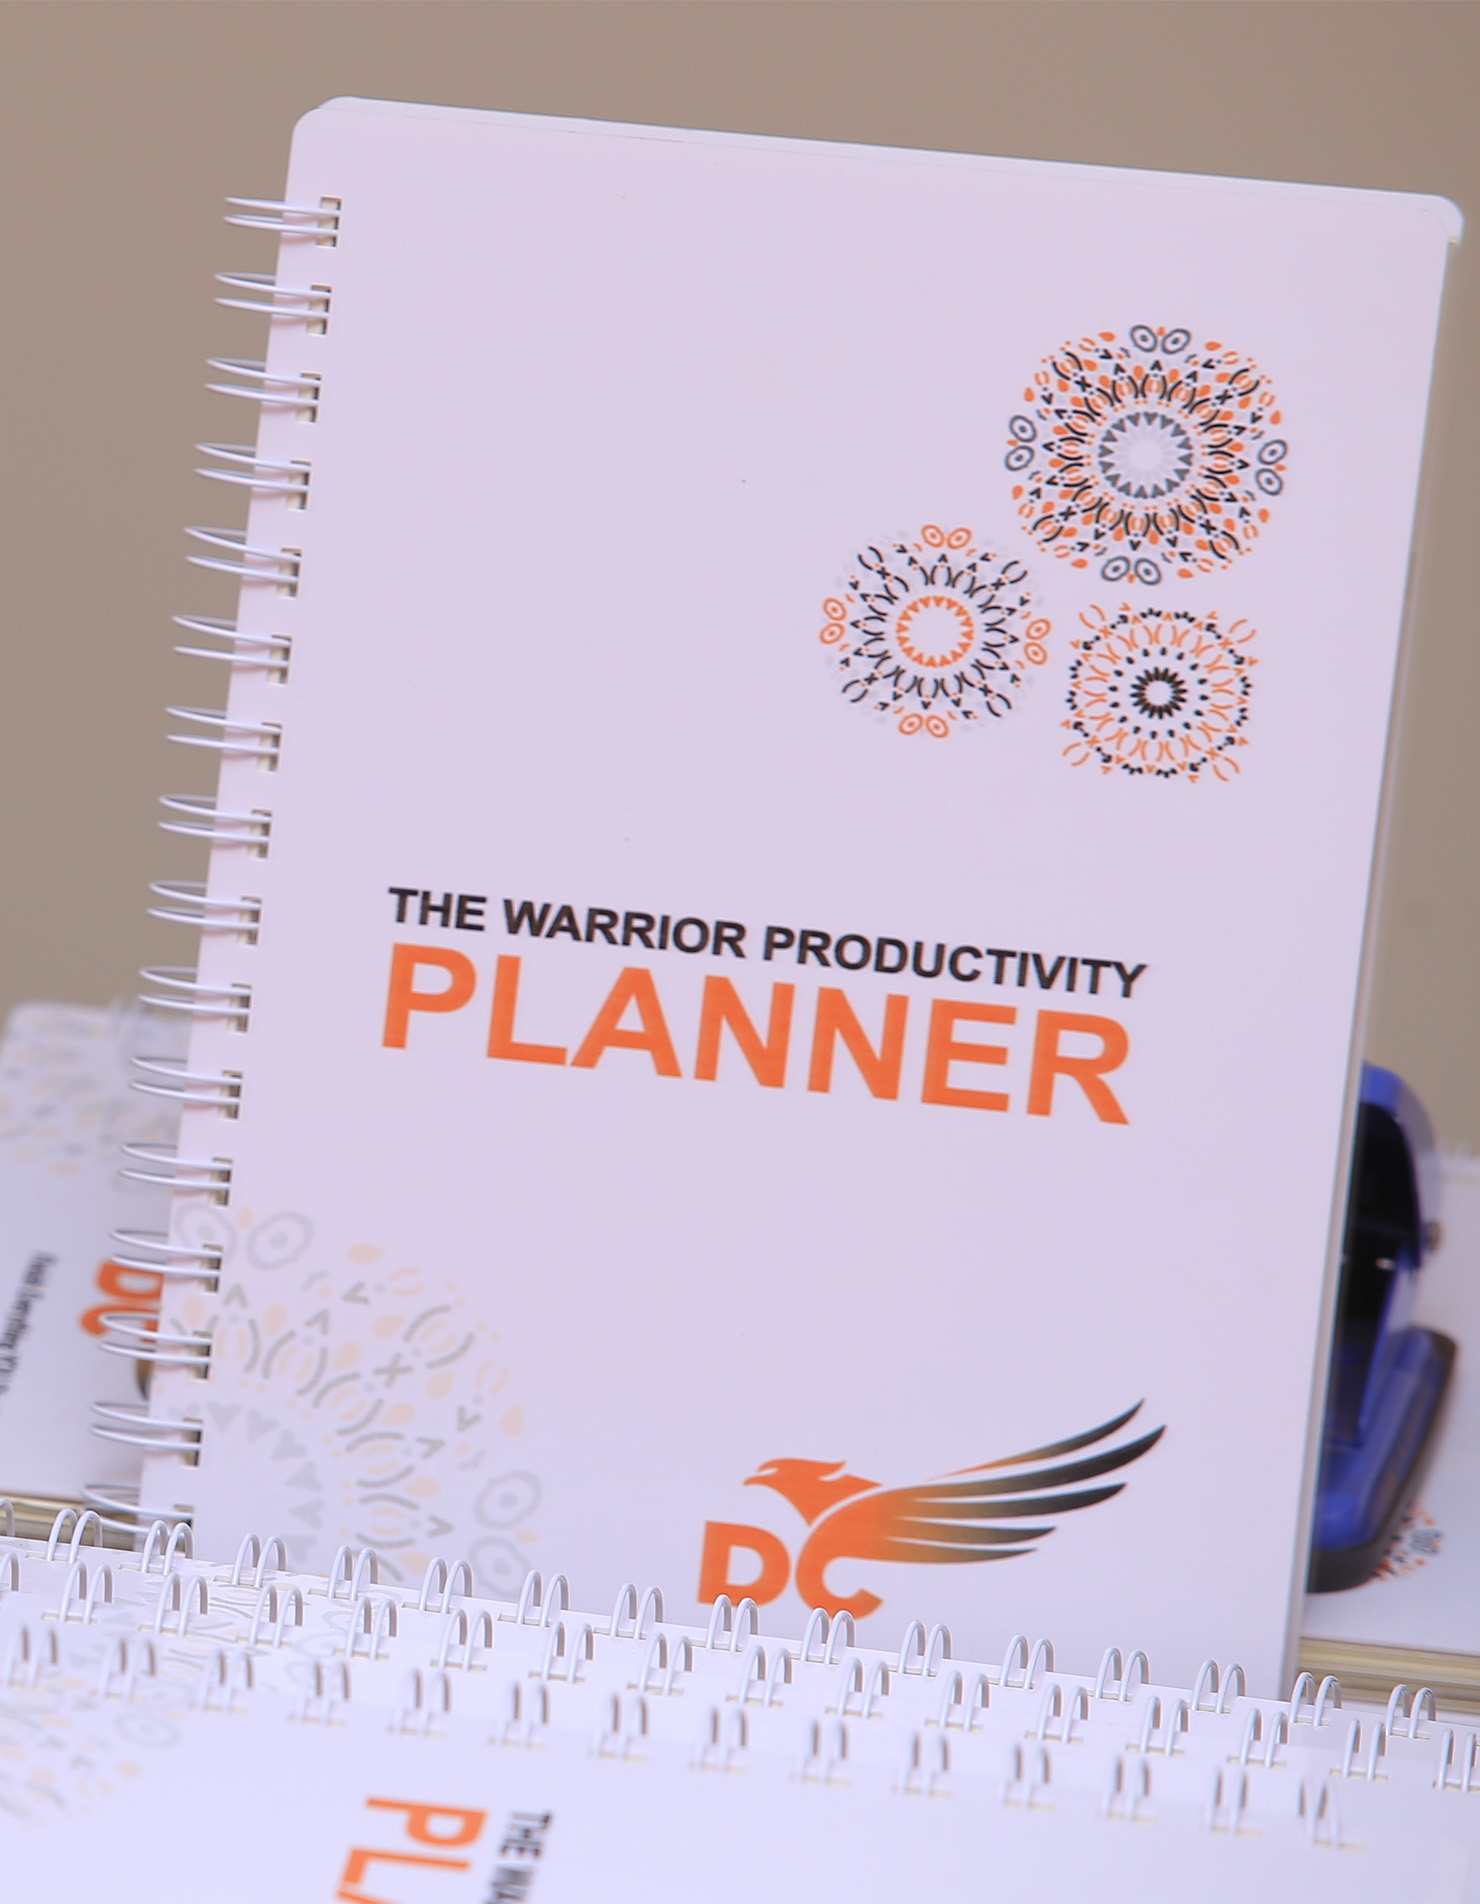  The Warriors Productivity Planners